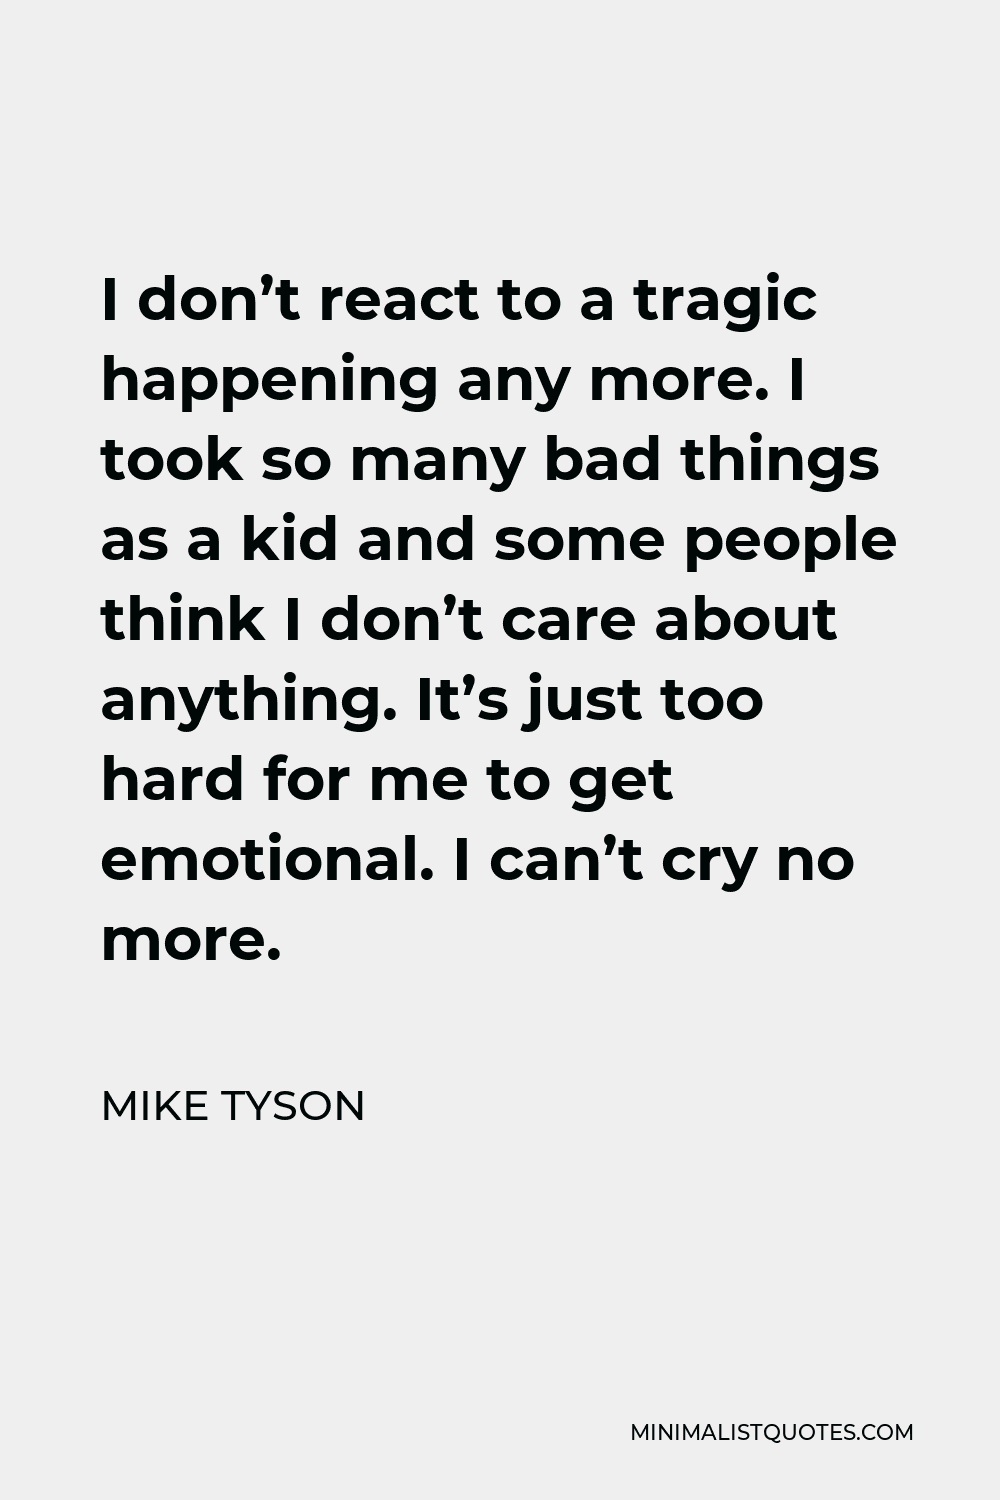 Mike Tyson Quote - I don’t react to a tragic happening any more. I took so many bad things as a kid and some people think I don’t care about anything. It’s just too hard for me to get emotional. I can’t cry no more.